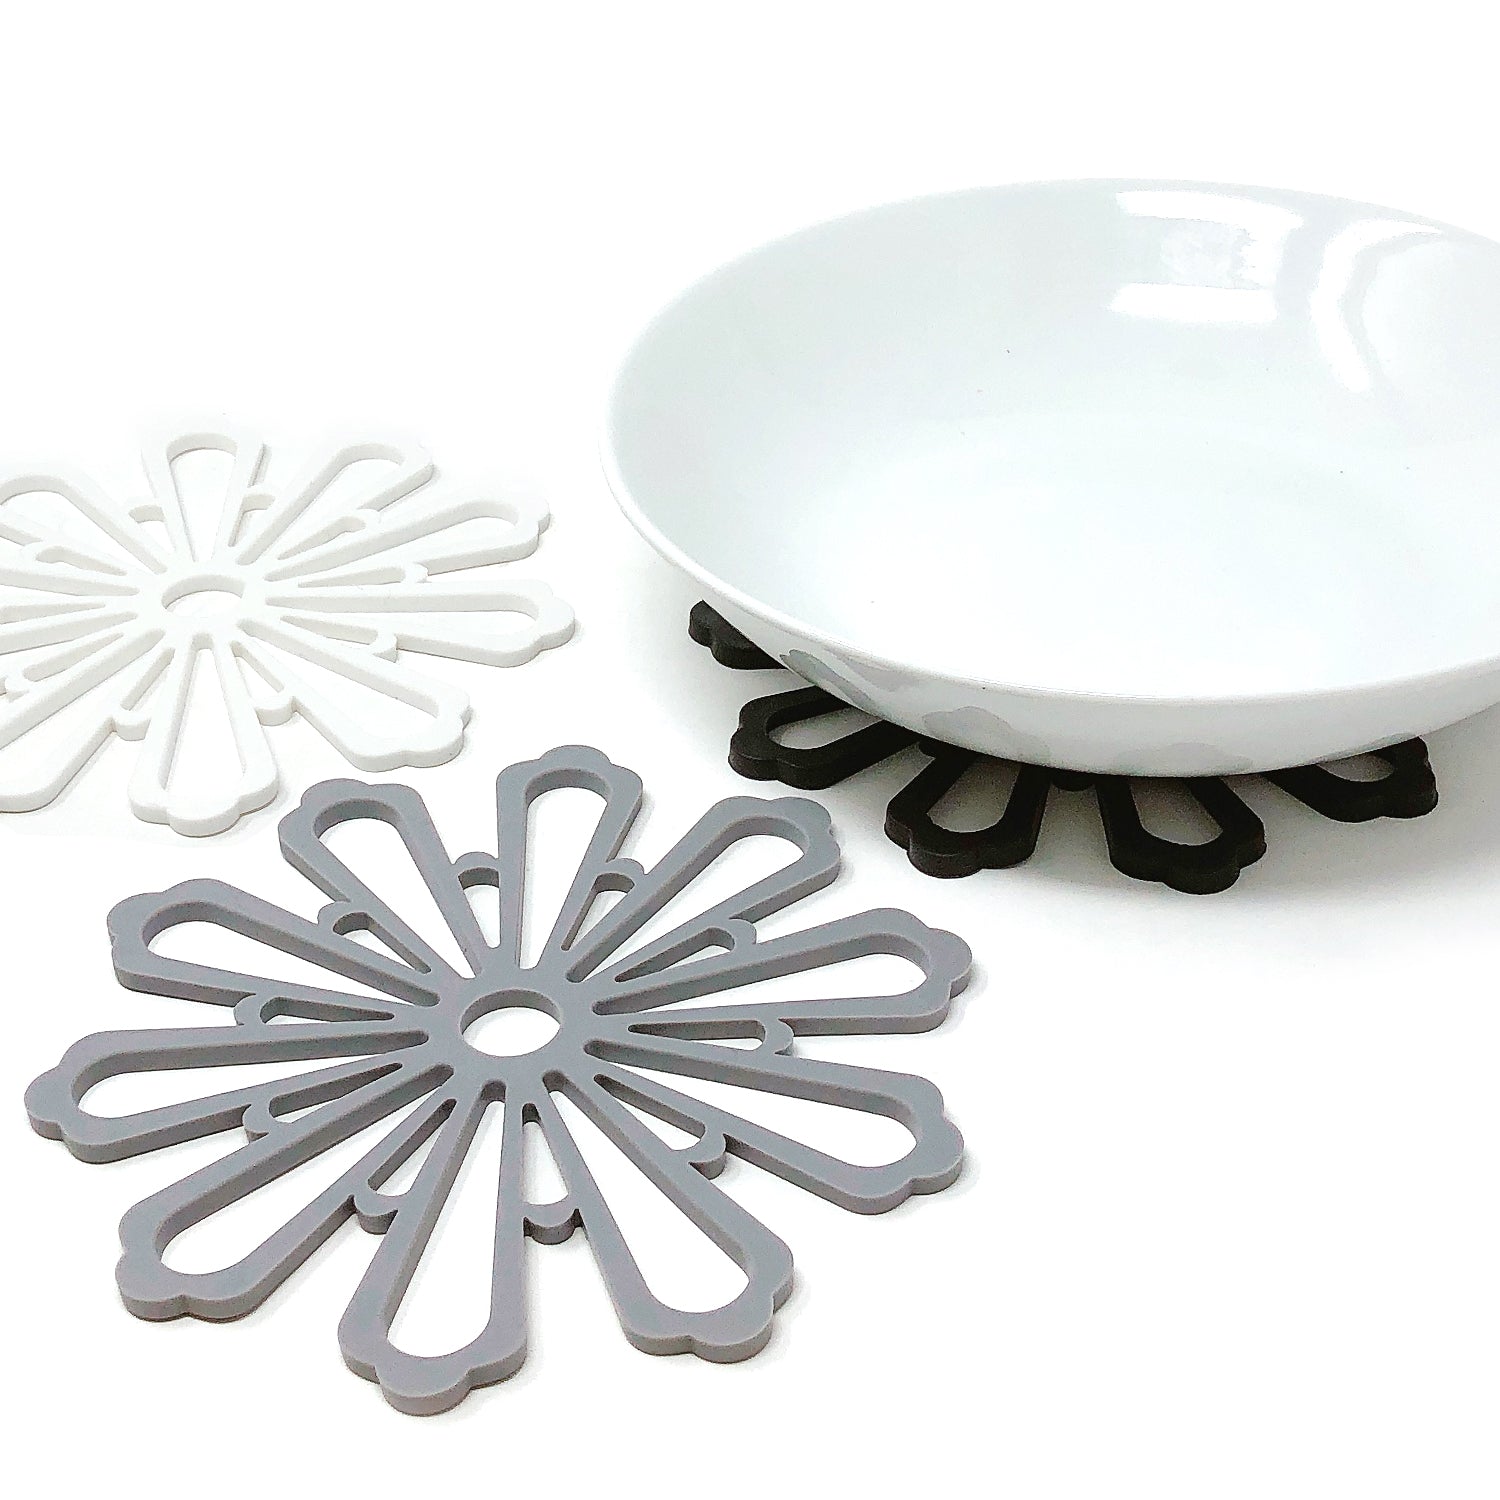 Wrapables Non-Slip Insulated Silicone Carved Trivets, Flexible and Durable Floral Coasters, Multi-Use Pot Holders & Placemats Set